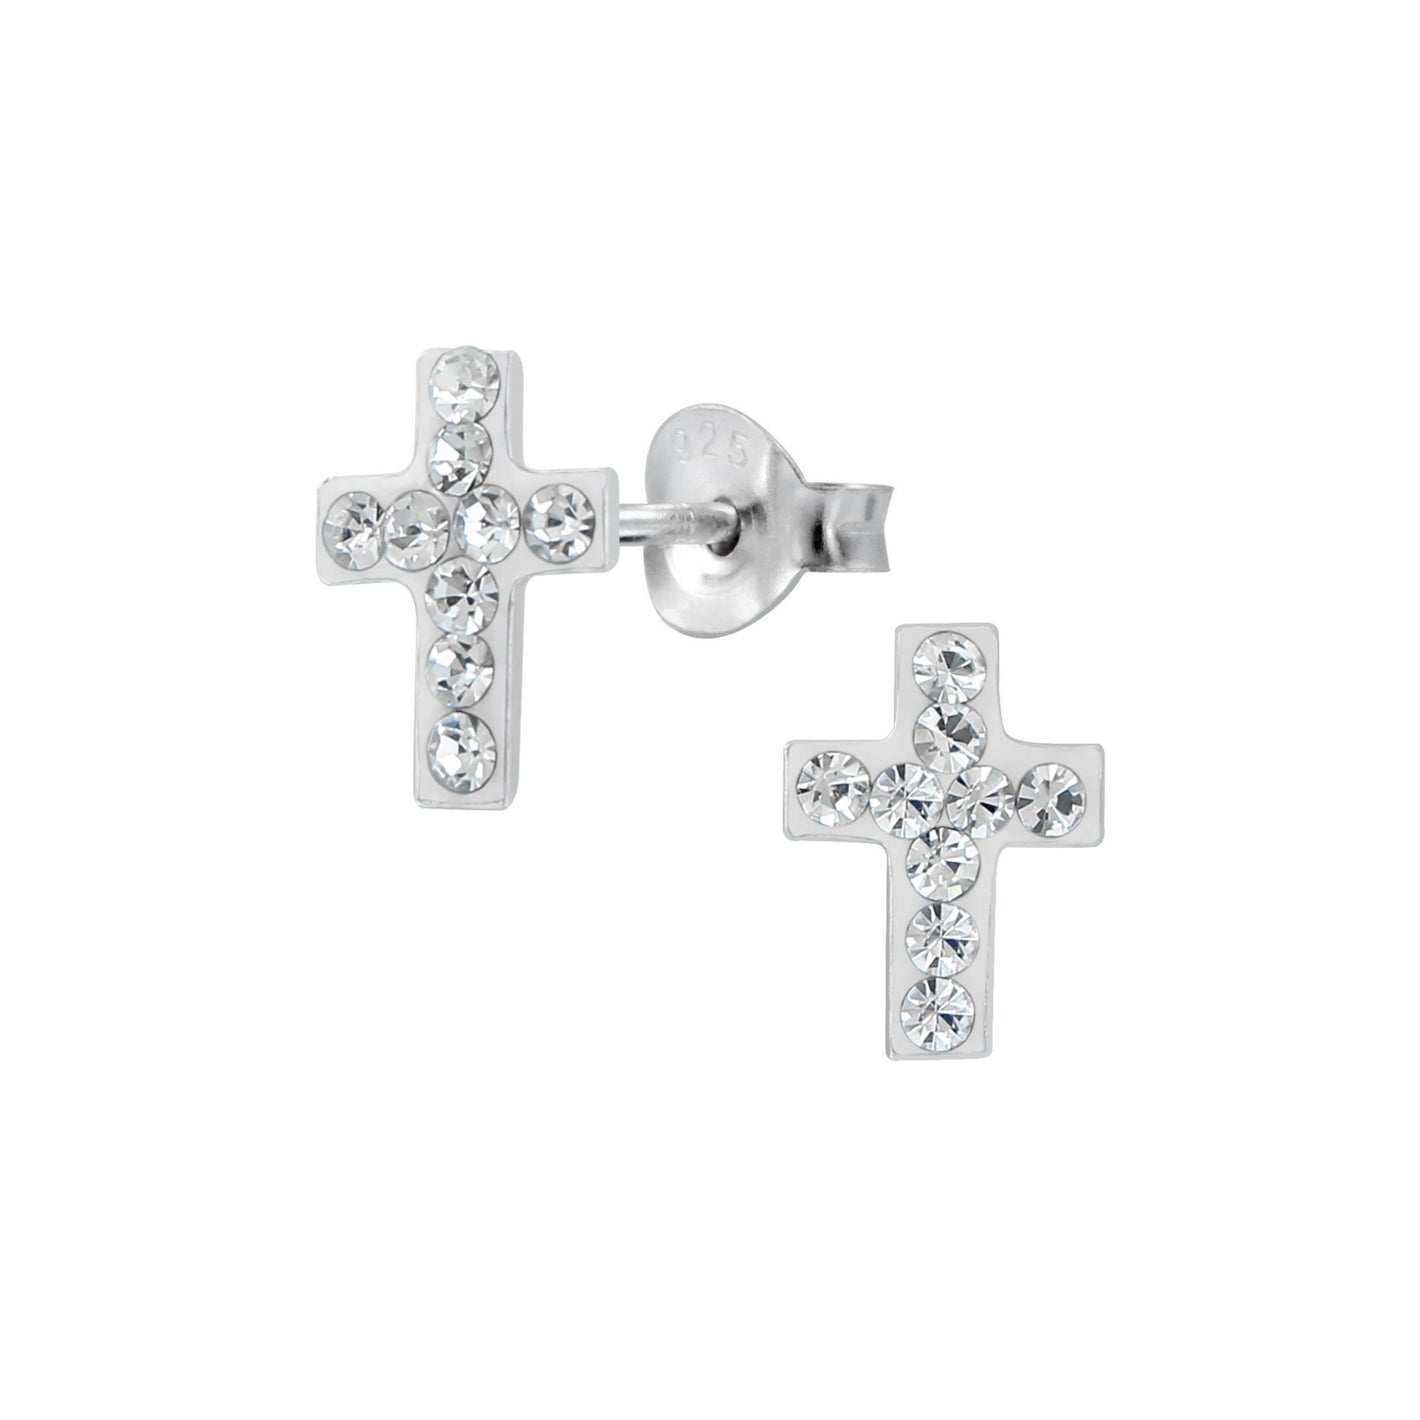 Communion jewellery and bagdes collection - Silverbling.ie